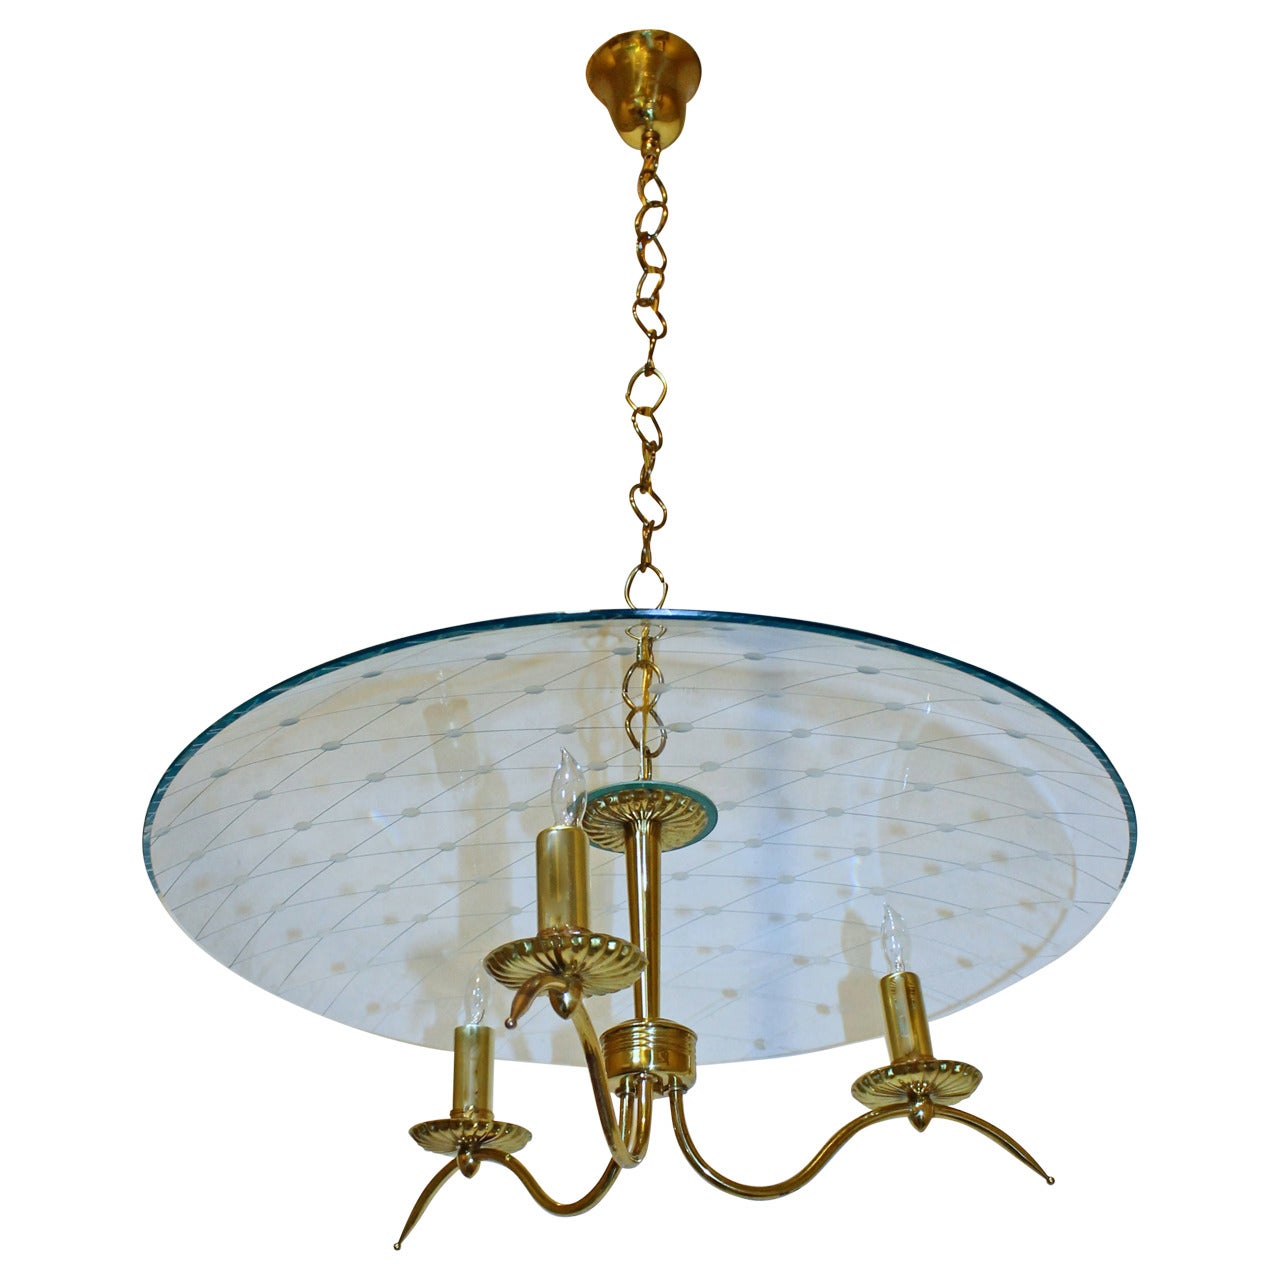 Exquisite Italian Fontana Arte Style Brass Etched Glass Chandelier For Sale